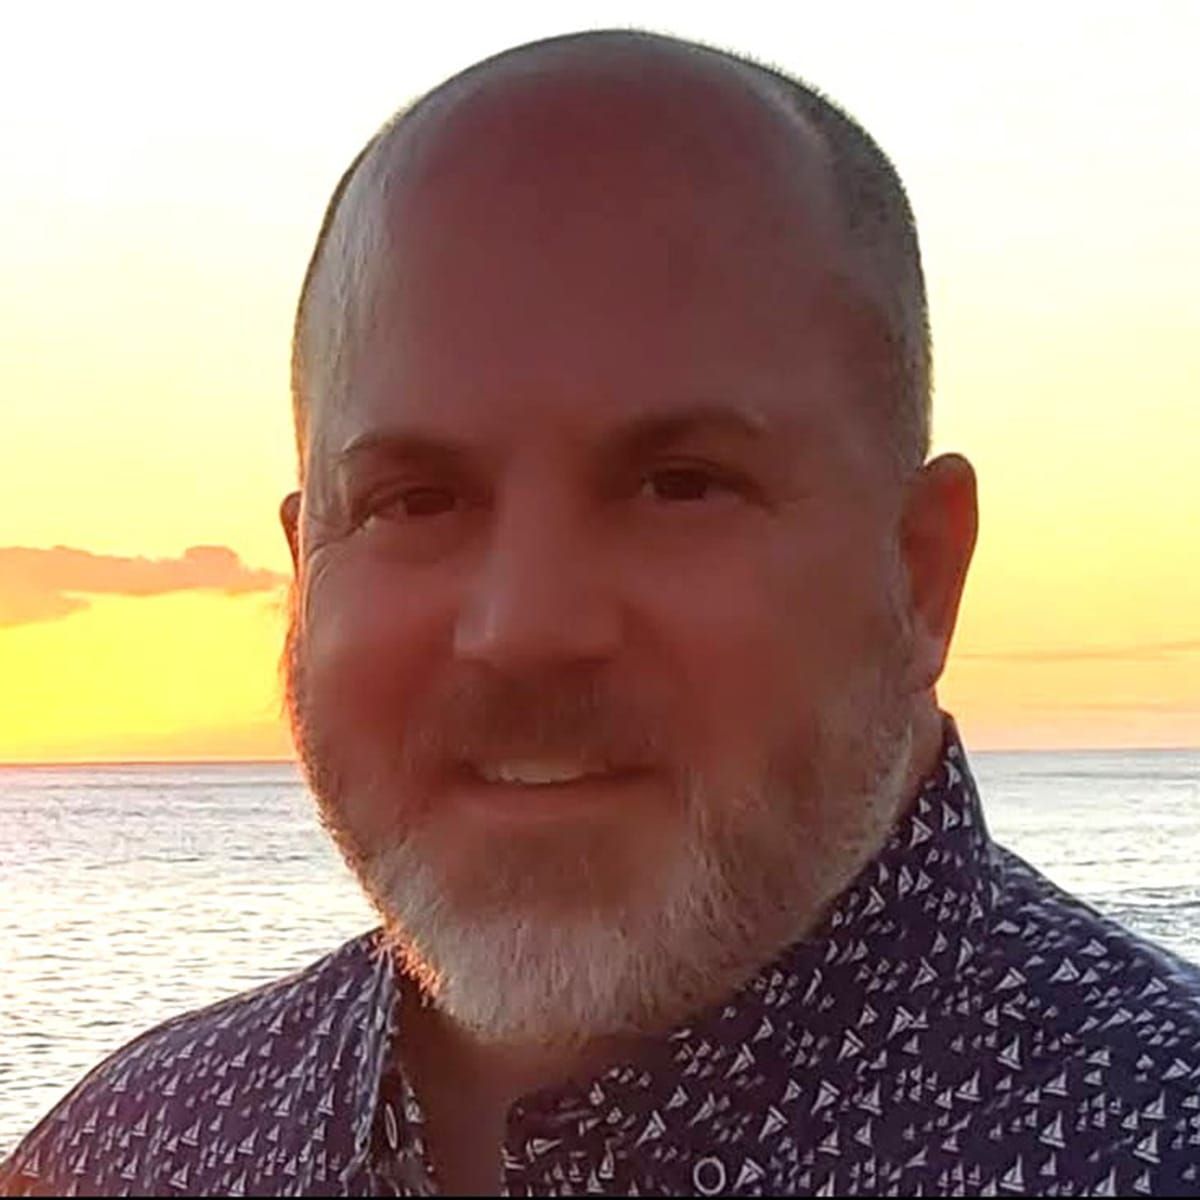 A man with a beard is smiling in front of the ocean at sunset.